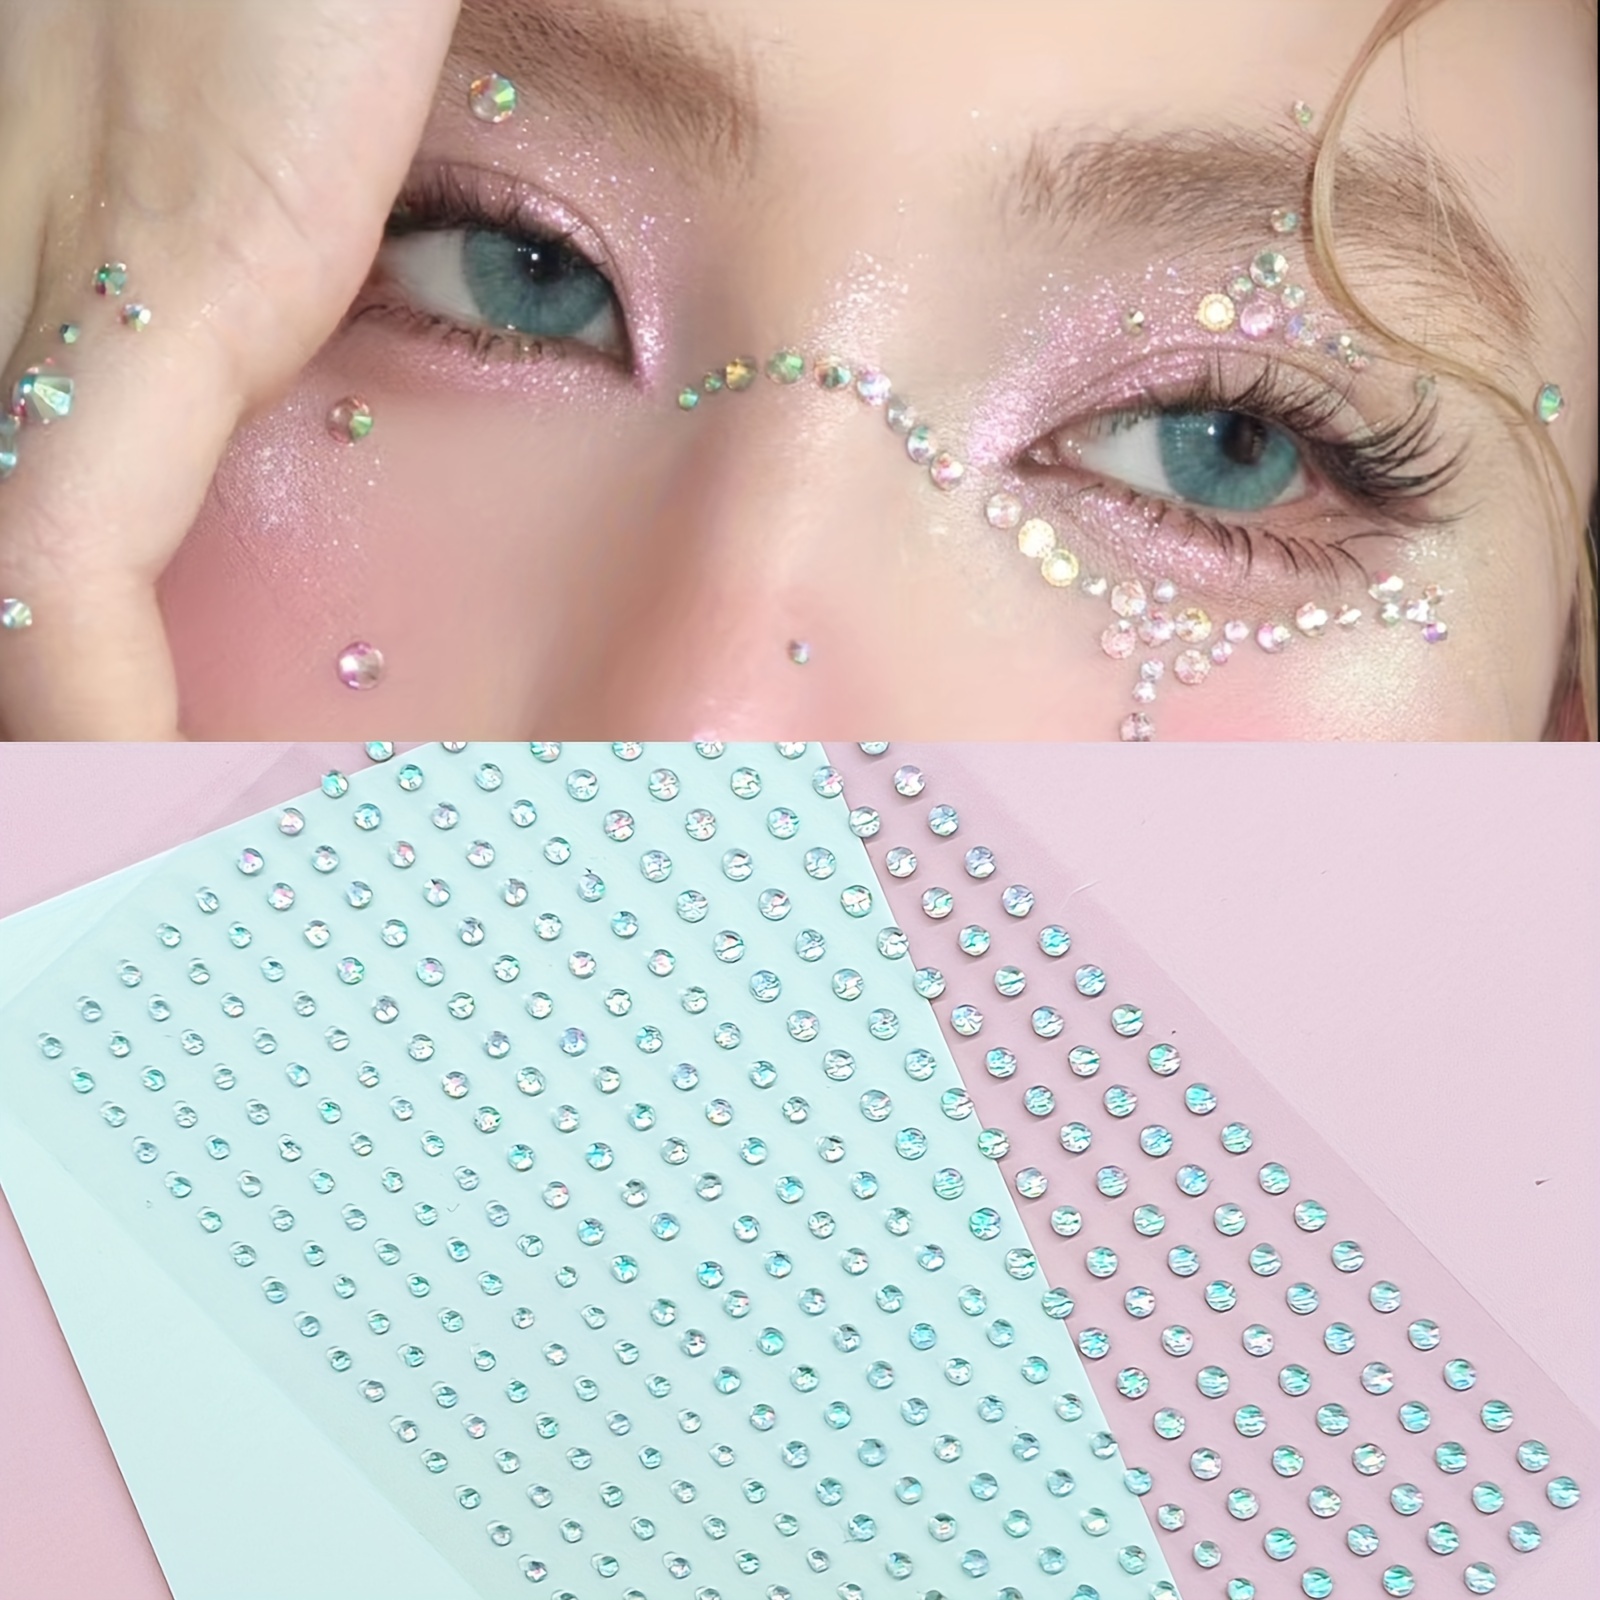 Eyebrows, Face Drills, Makeup Rhinestones, Face Decoration, Tears, Colored  Eye Makeup Stickers, Party Festival Makeup Decorations, Faces, Body Colored  rhinestoness Jewelry Stickers